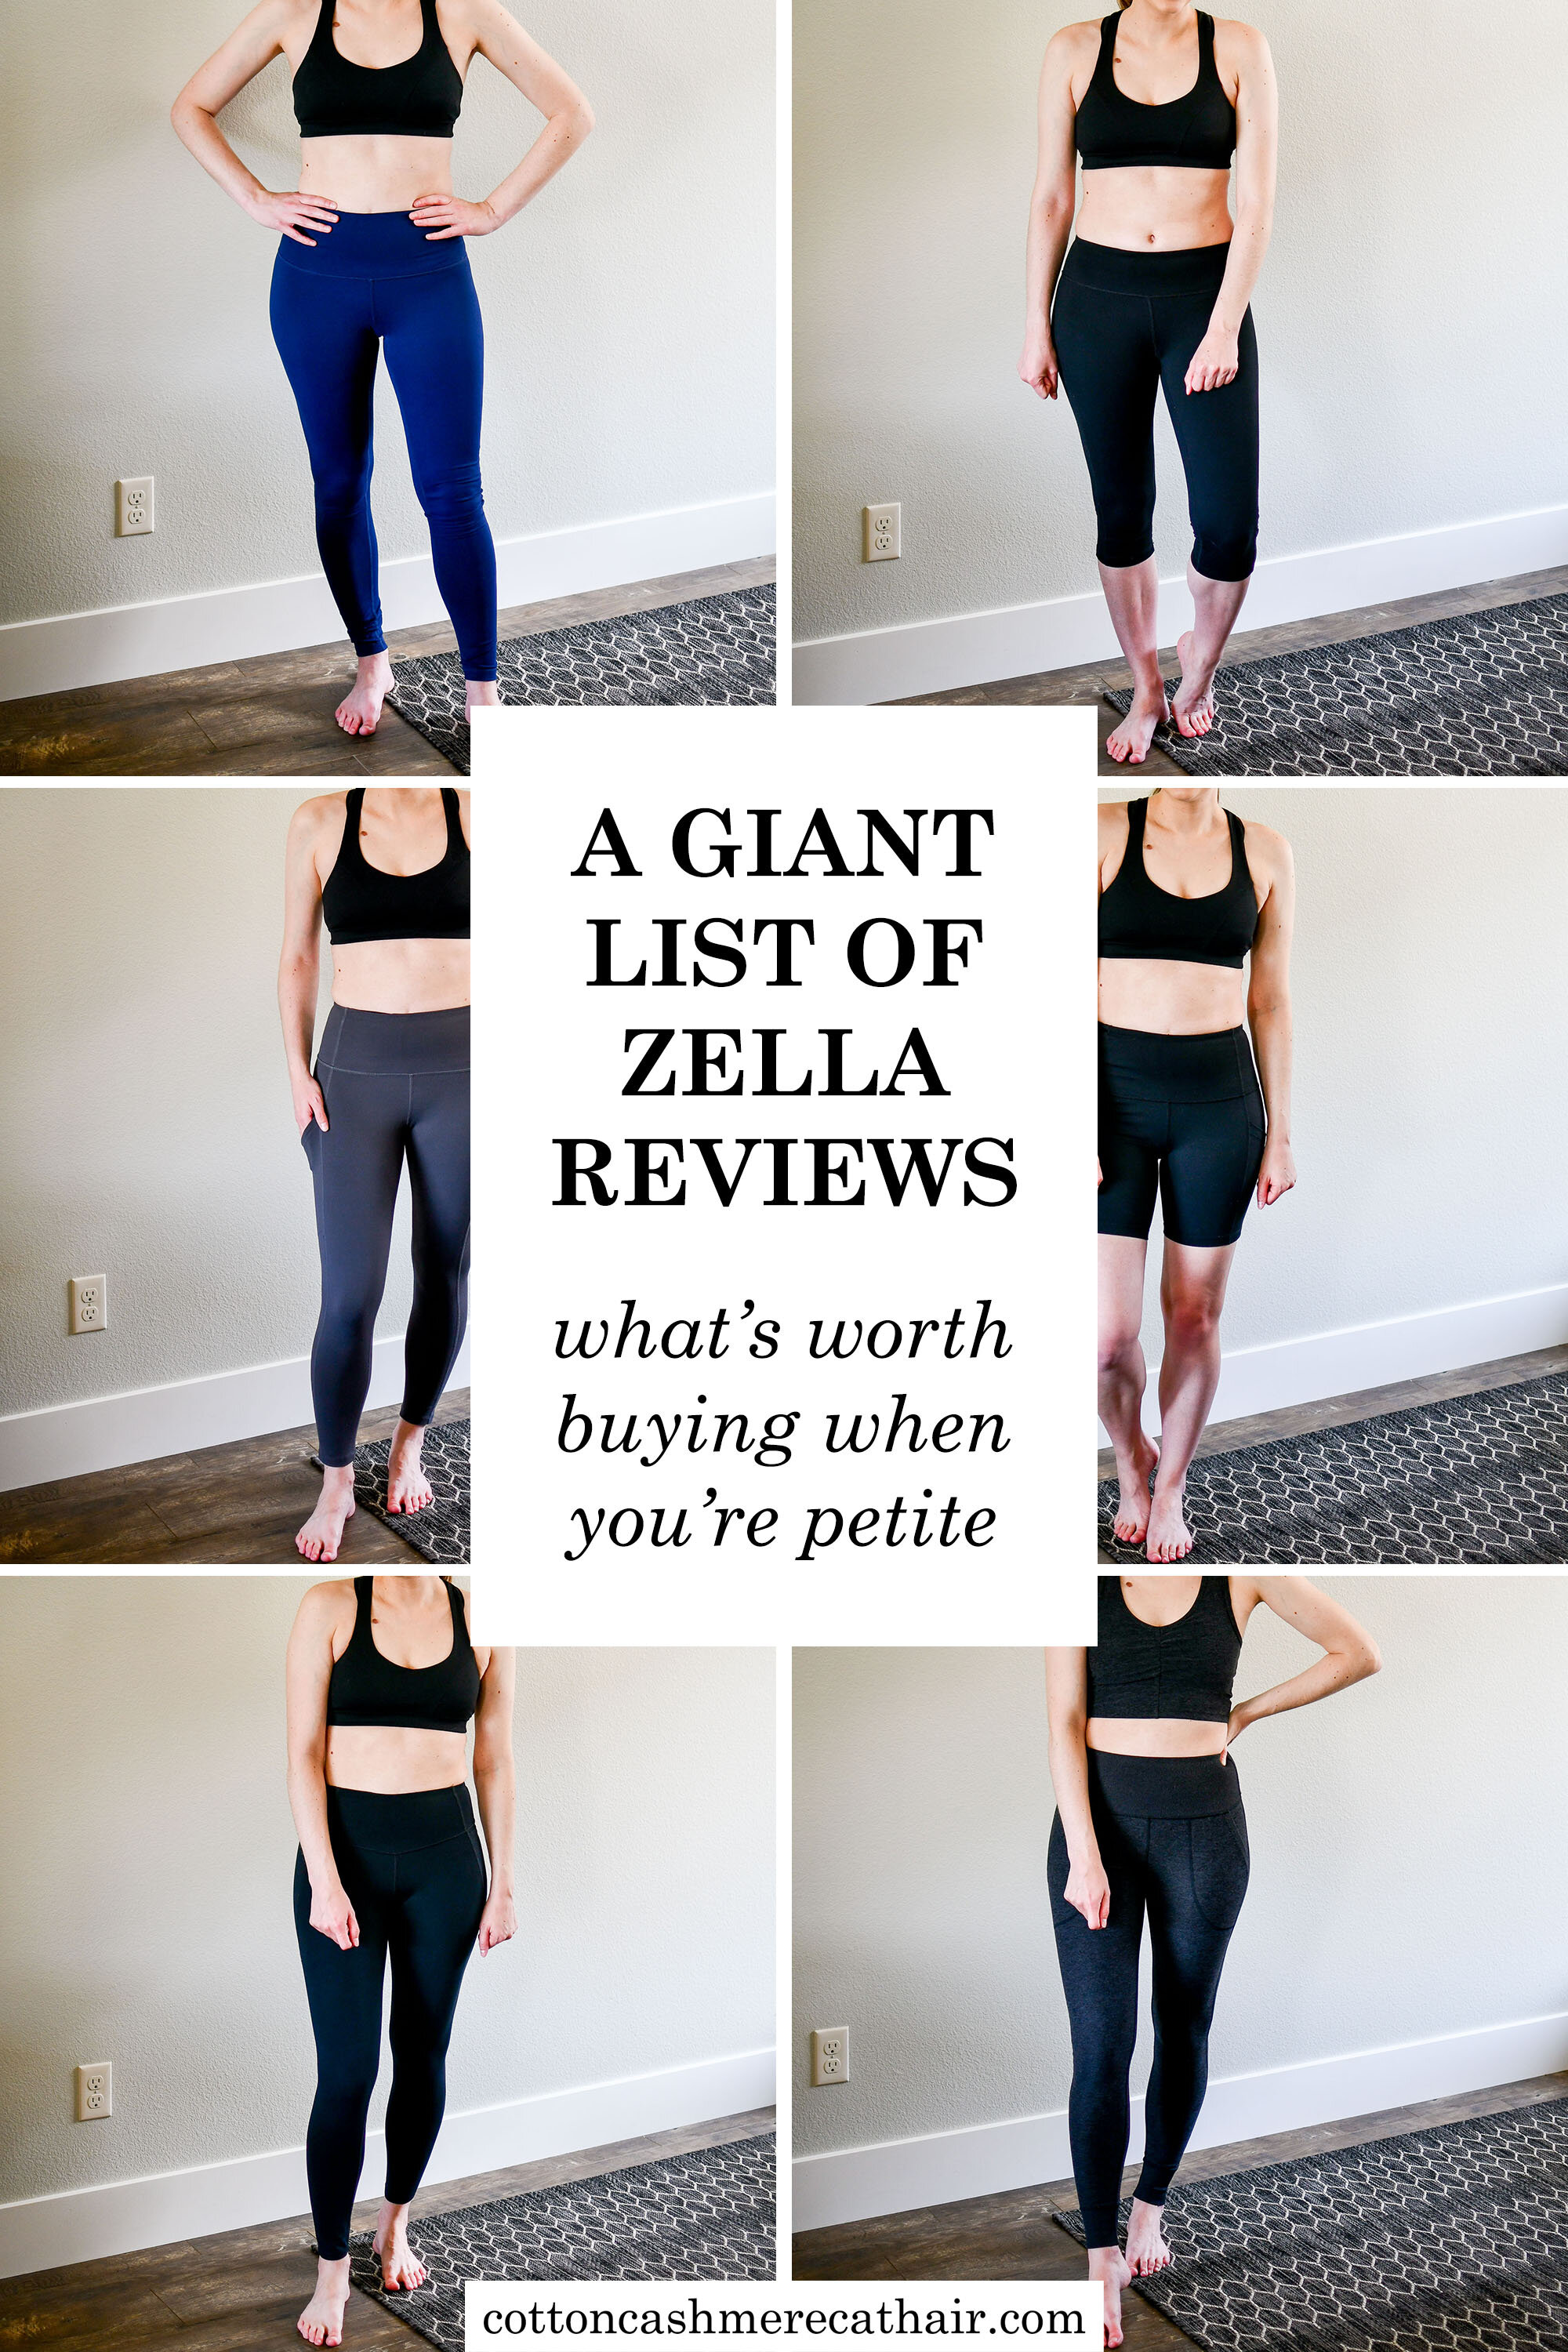 My Lululemon Collection: Includes Review and Comparison to Zella